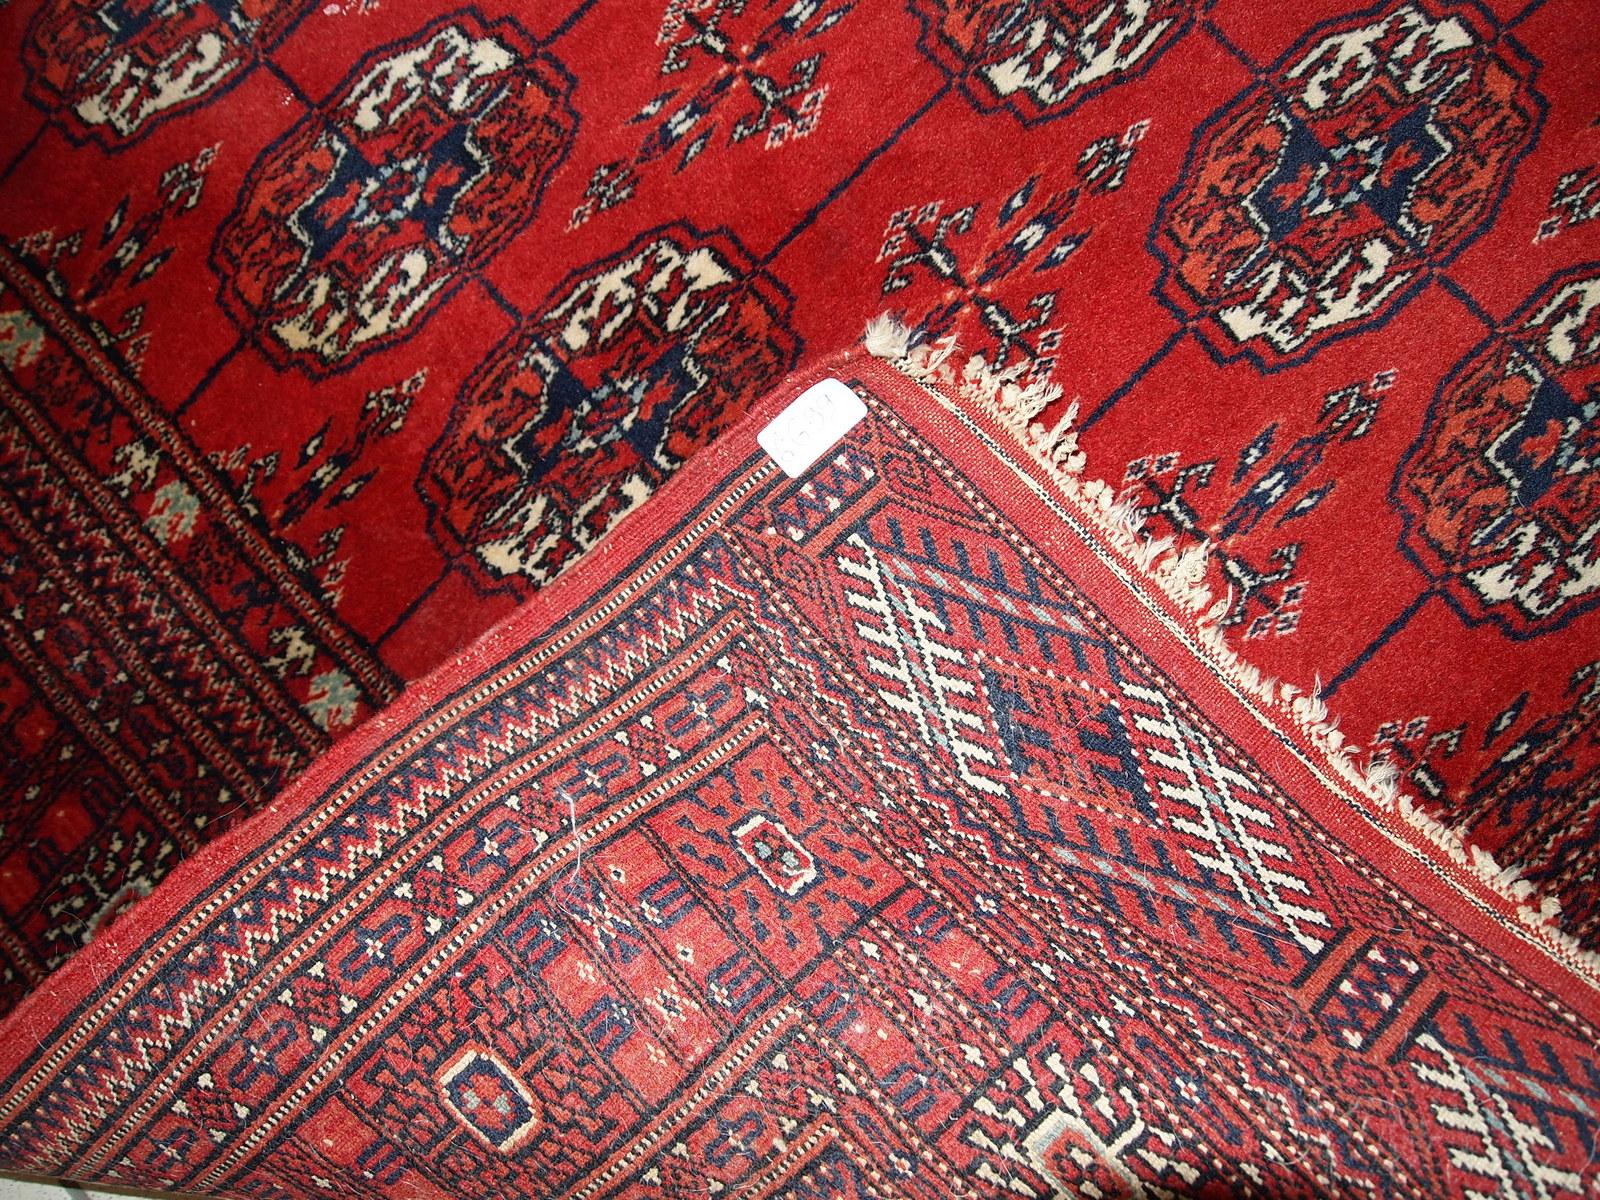 Vintage handmade Tekke rug from Turkmenistan in original good condition. It has been made in the end of 20th century in red wool.

-condition: original good,

-circa: 1970s,

-size: 3.5' x 3.6' (109cm x 112cm),

-material: wool,

-country